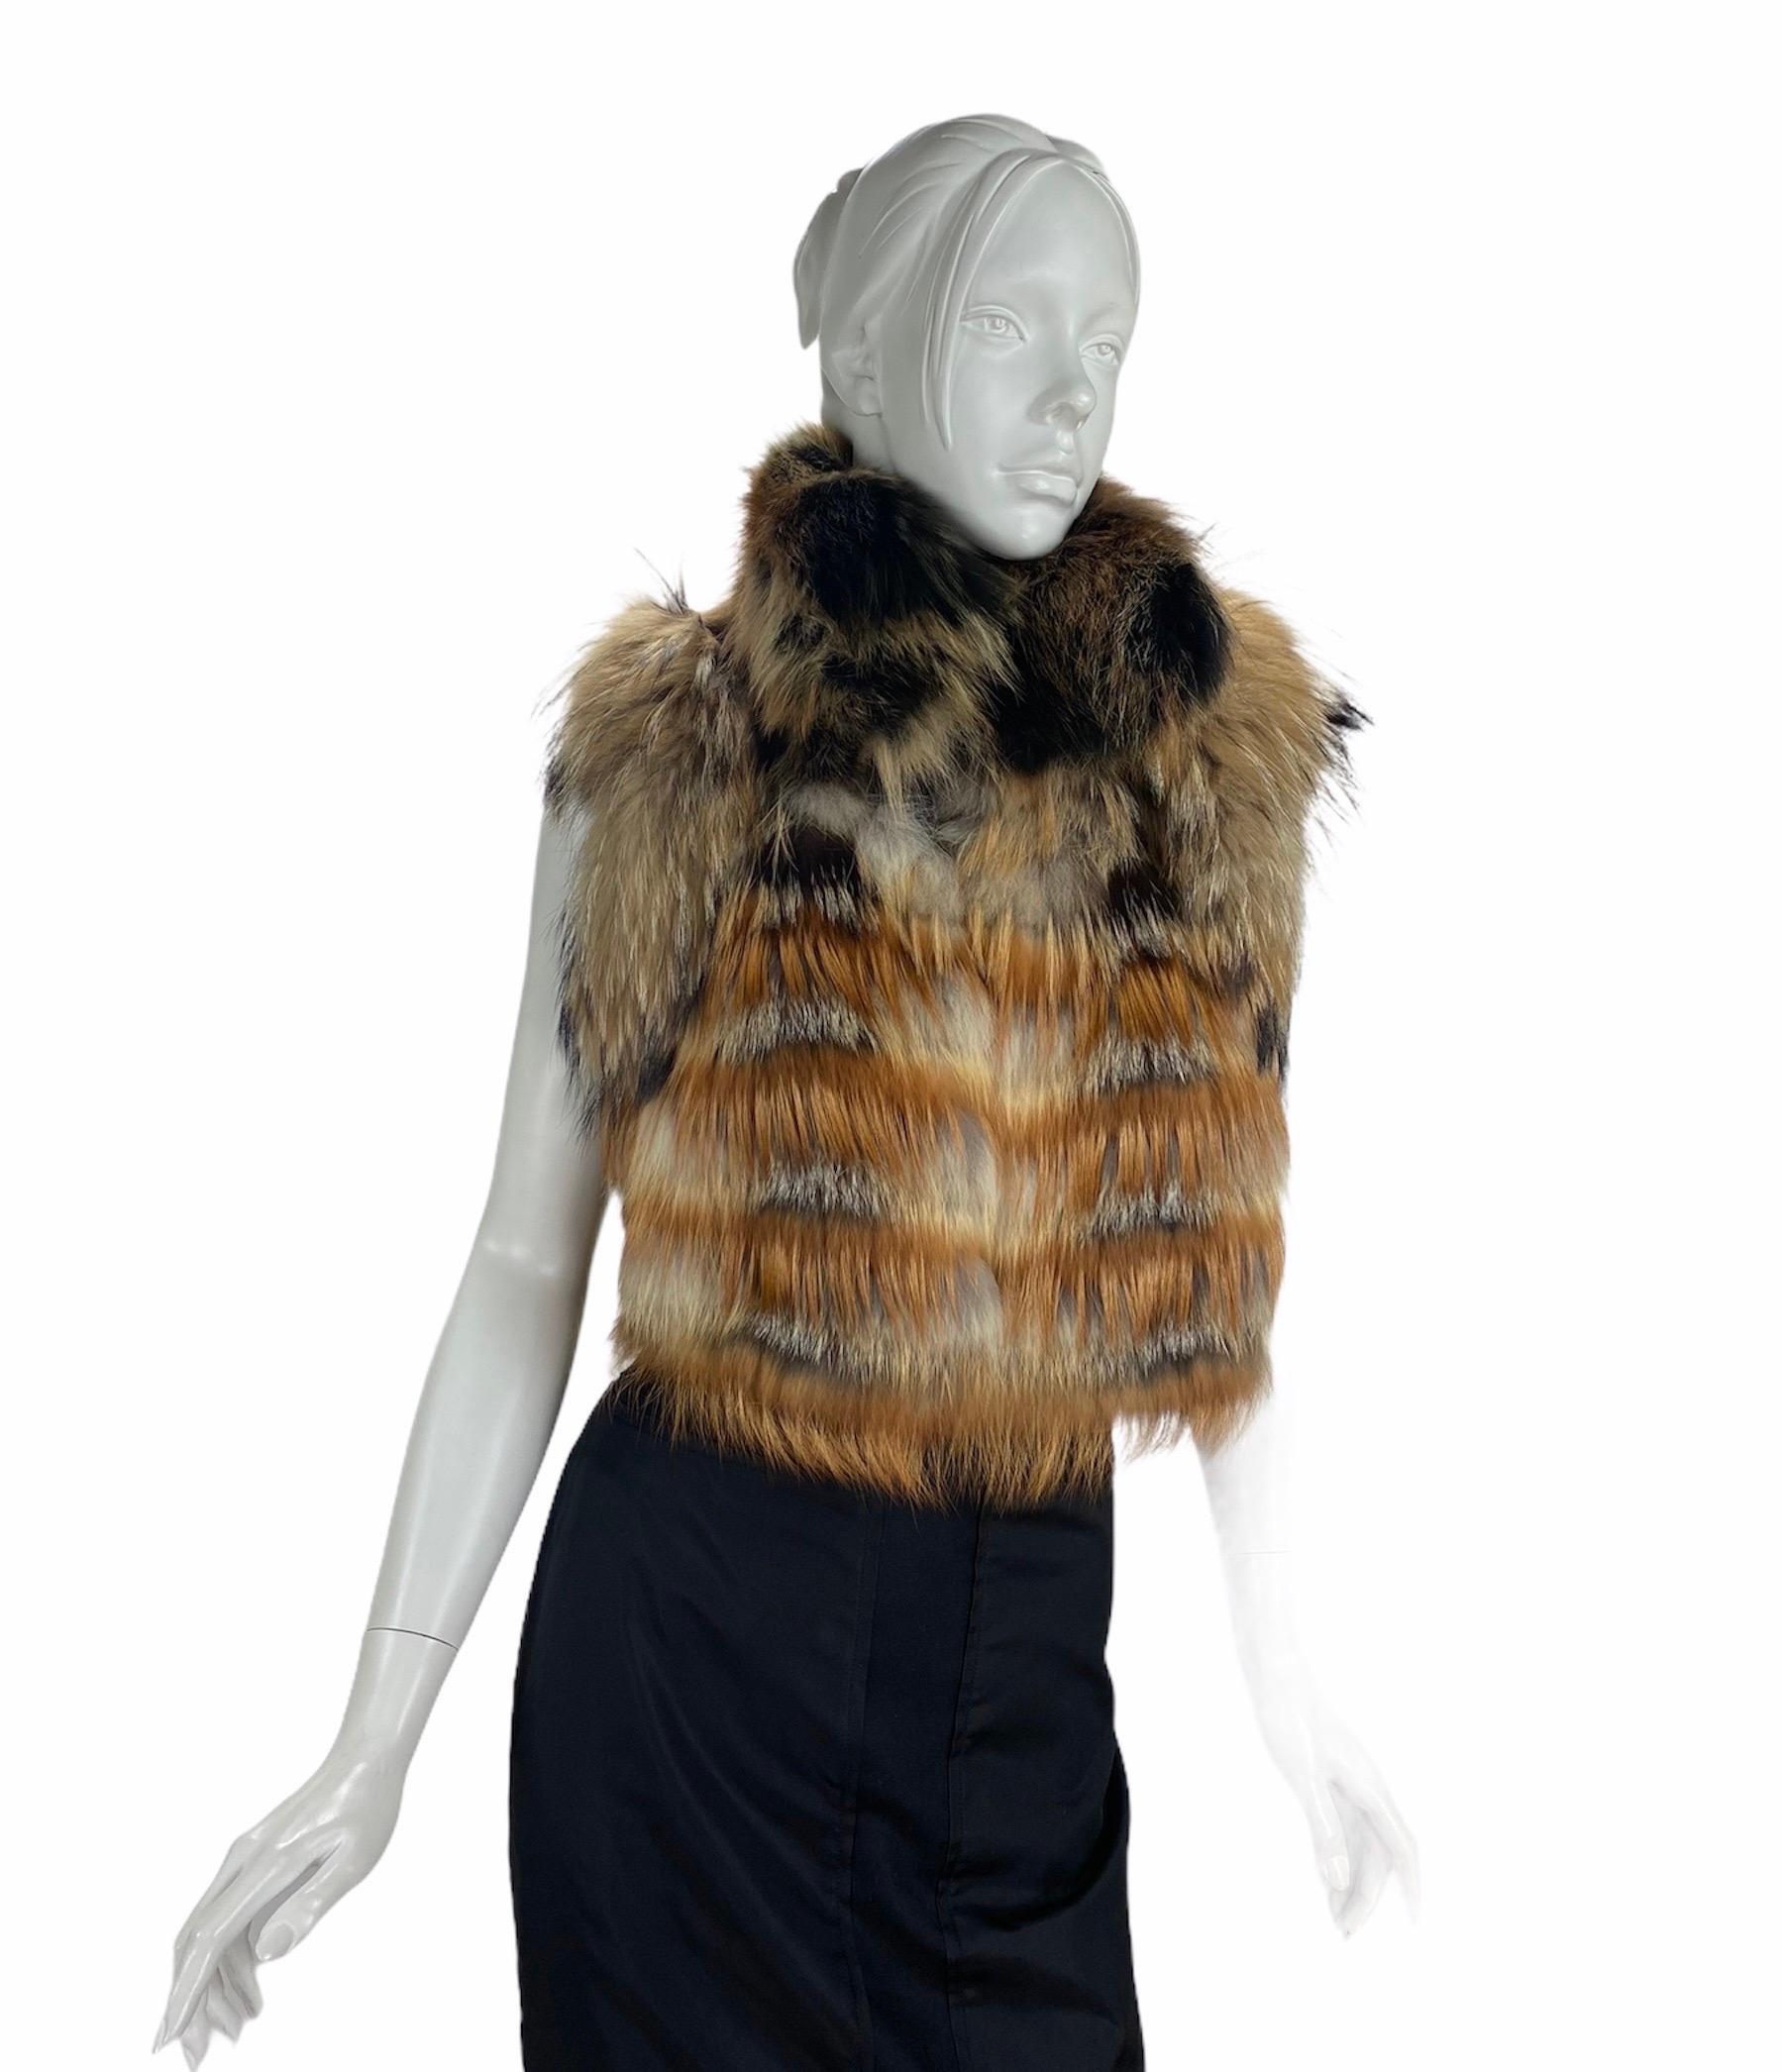 LANVIN Fourrure Fox Fur Sleeveless Vest Jacket
Approximate size S
Fox fur, Signature Silk Lining, Two Buttons Closure. Bust 36 inches, Waist 34”, Length 17”.
Retail price is $9,599.00
Excellent condition.